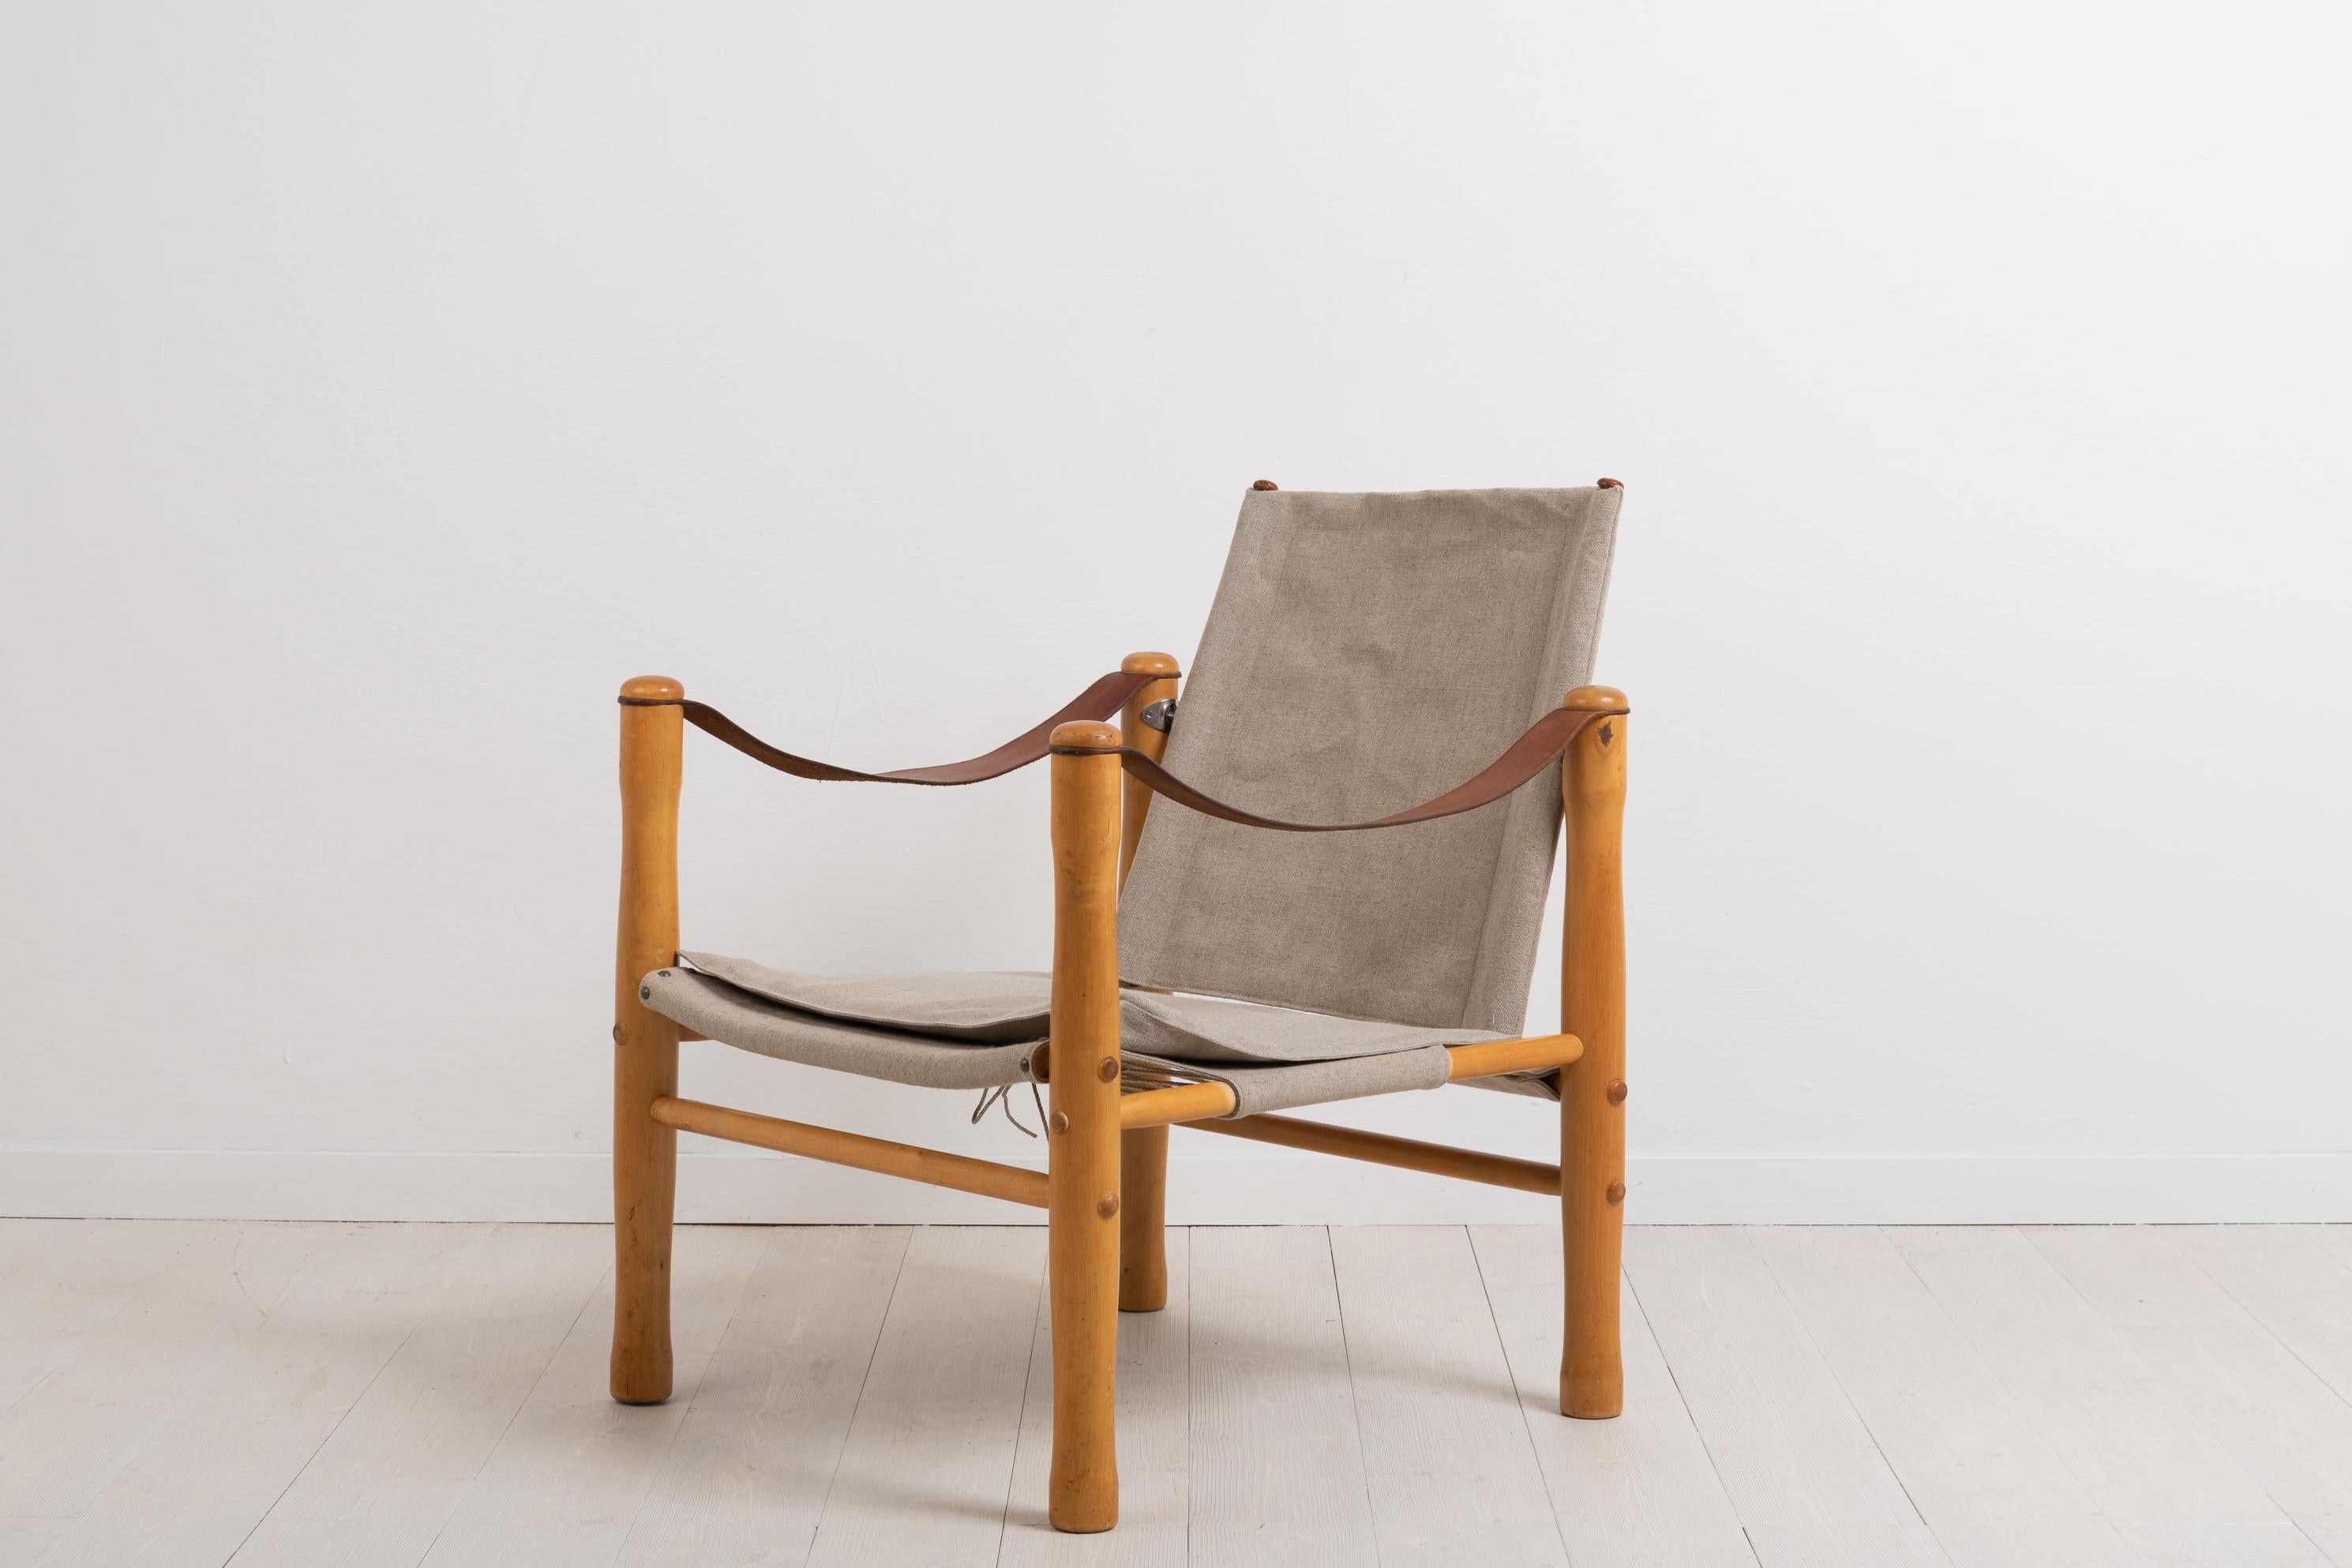 Safari chair by Elias Svedberg for NK – Nordiska Kompaniet in Sweden. The chair is a part of the Trivia series and was designed and manufactured during the second part of the 20th century. It is an authentic Mid-Century Modern Swedish design chair.